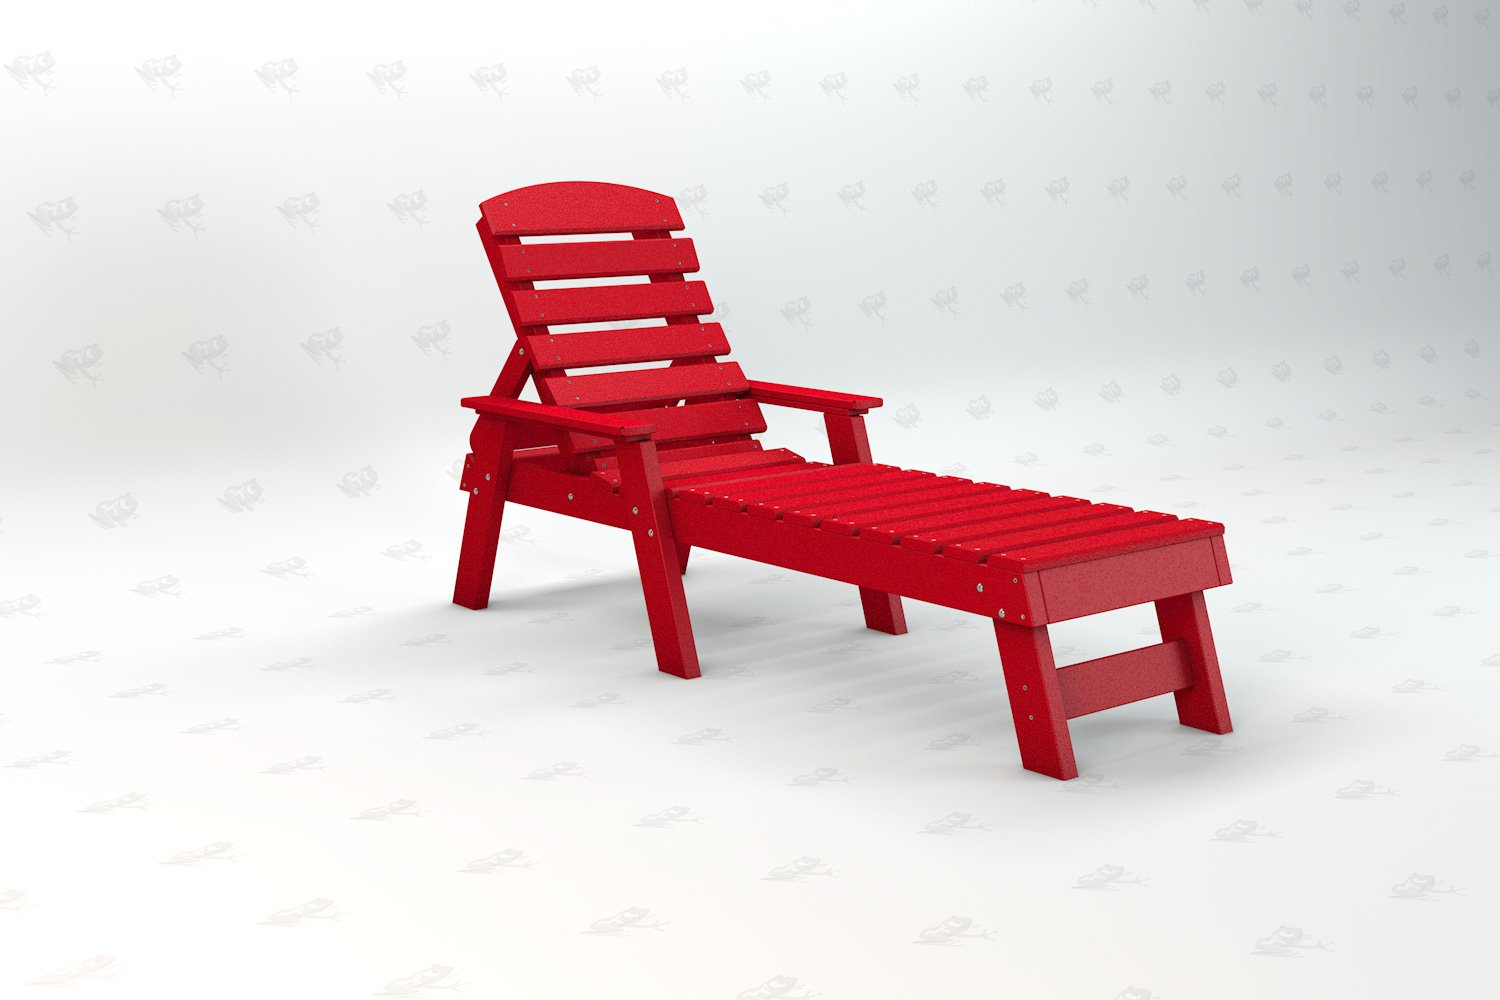 Pensacola Chaise Lounge Chair Left__RED